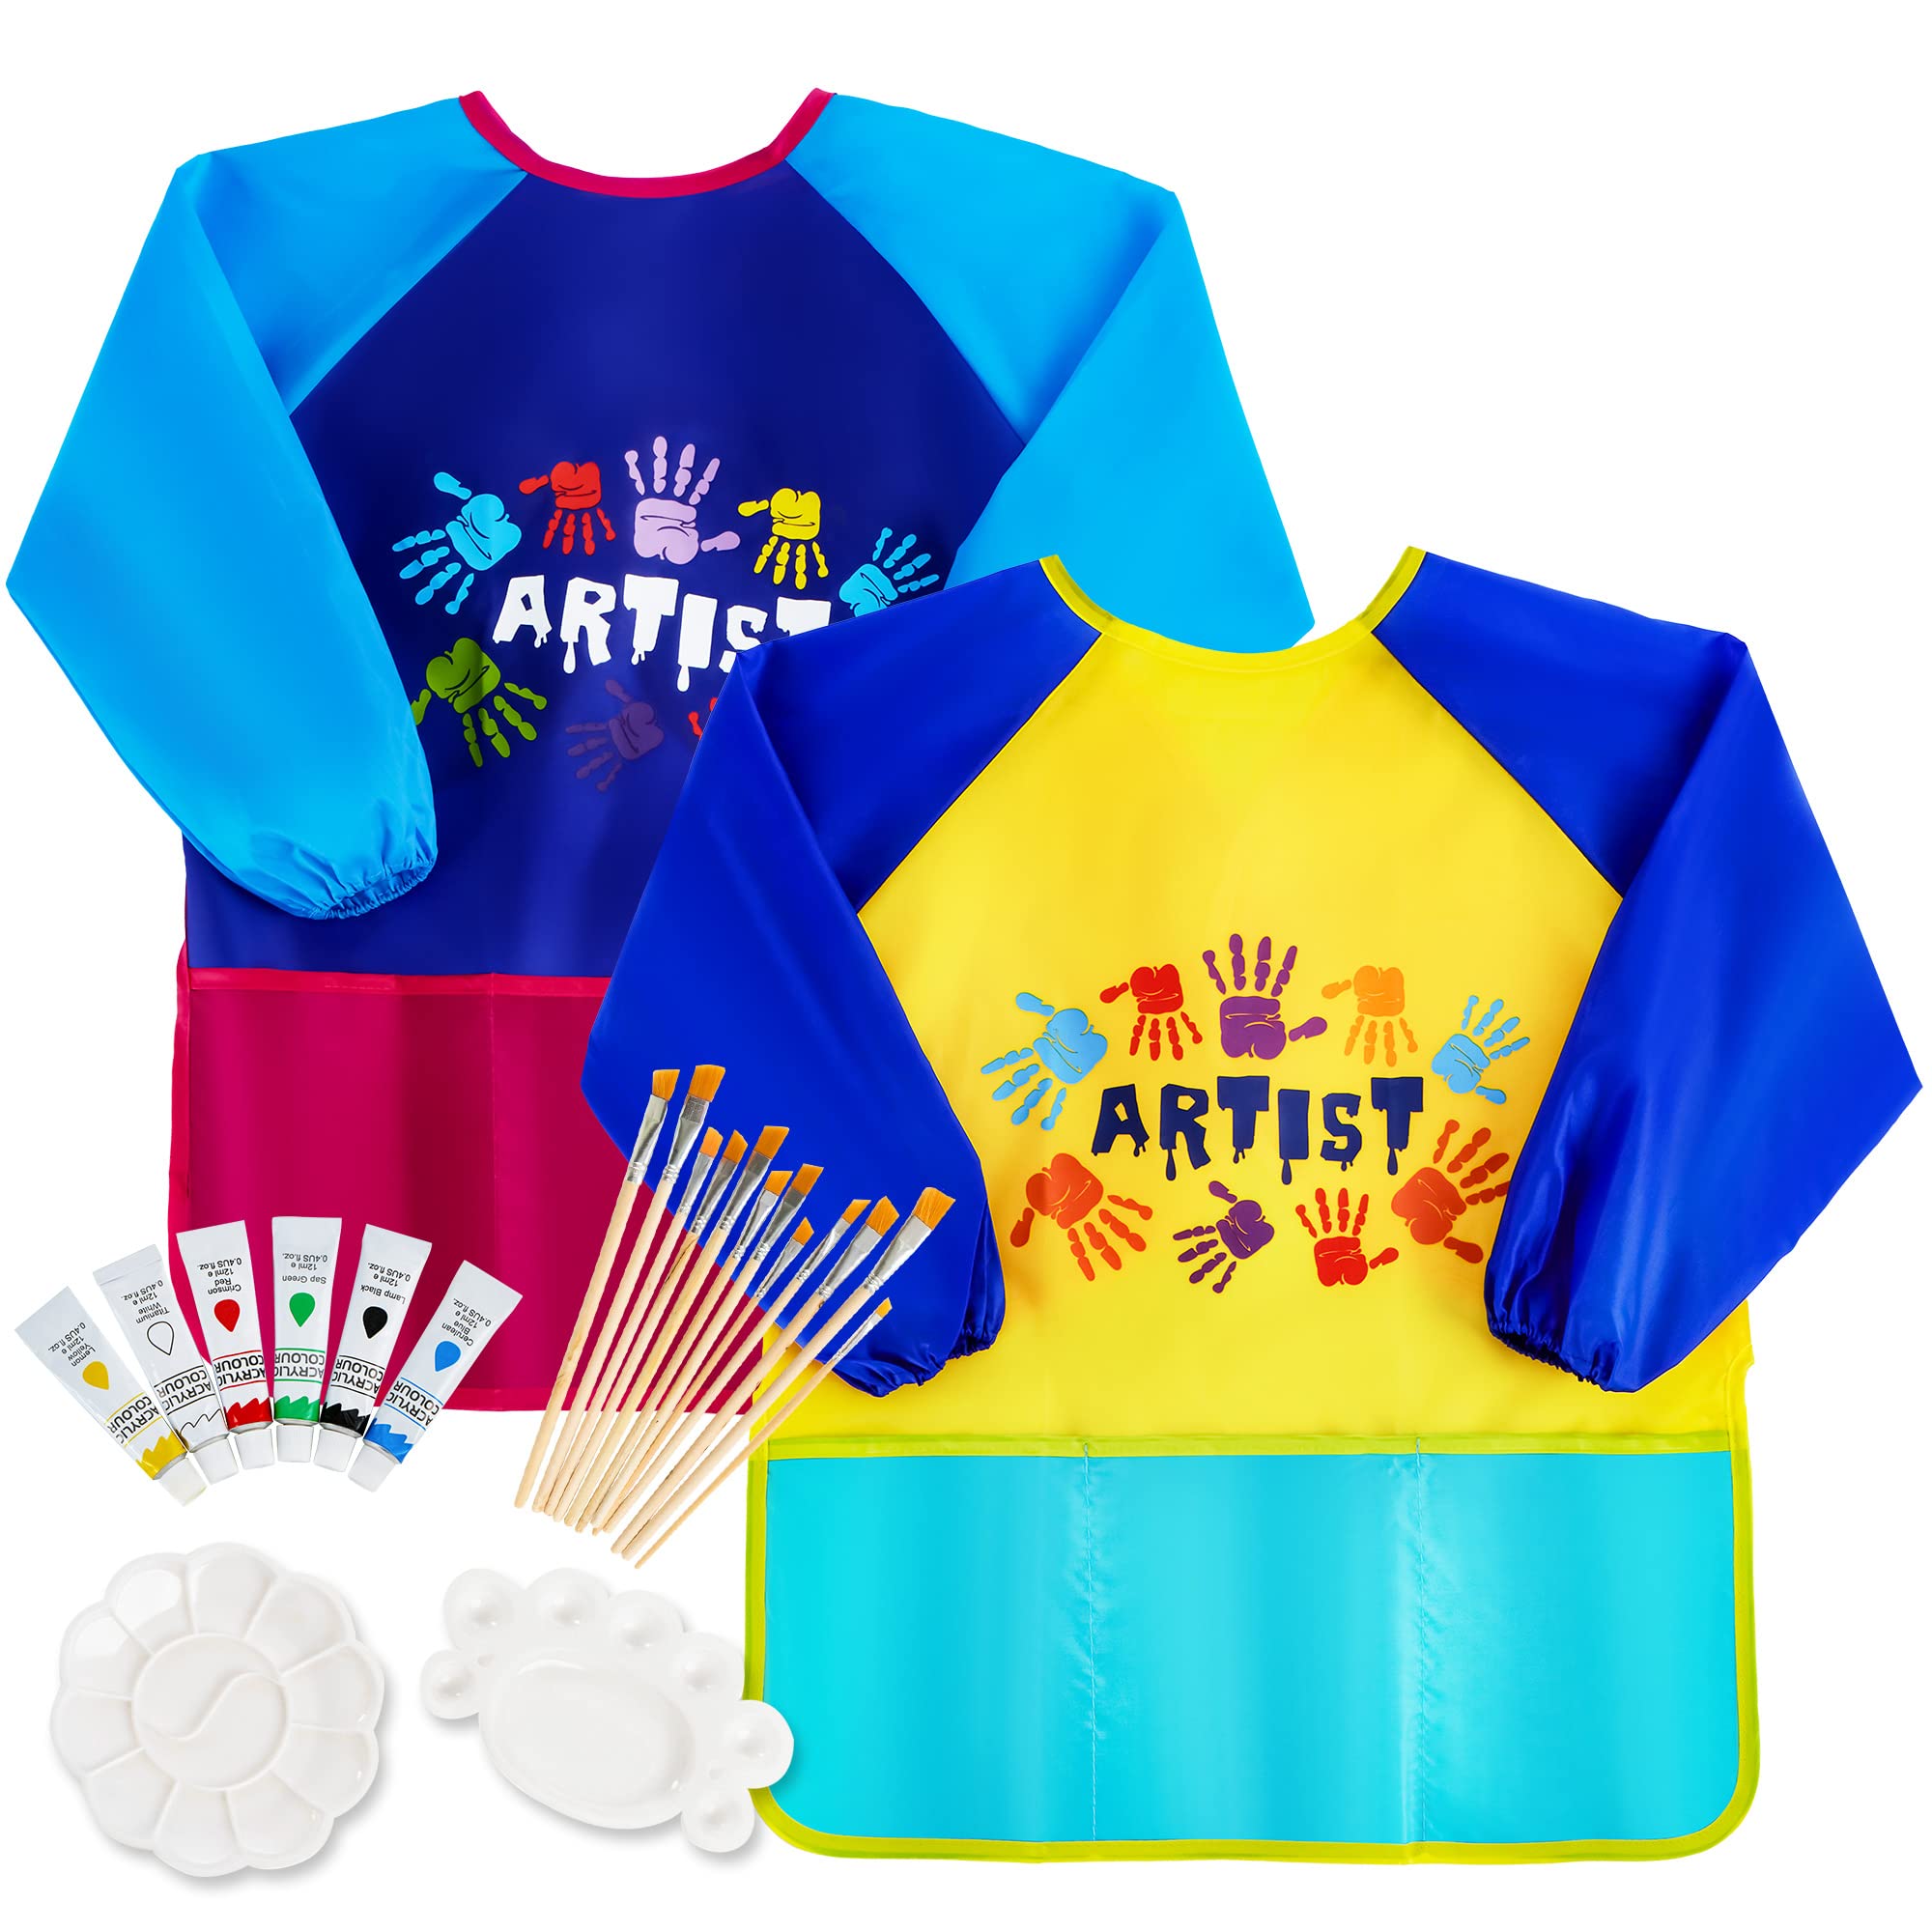 JOYIN 22Pcs Kids Art Smocks and Painting Brush for Kids, Includes 2Pcs Waterproof Artist Painting Aprons with 3 Pockets 12 Paint Brushes, Arts & Crafts for Toddlers and Kids, Christmas Gifts for Kids